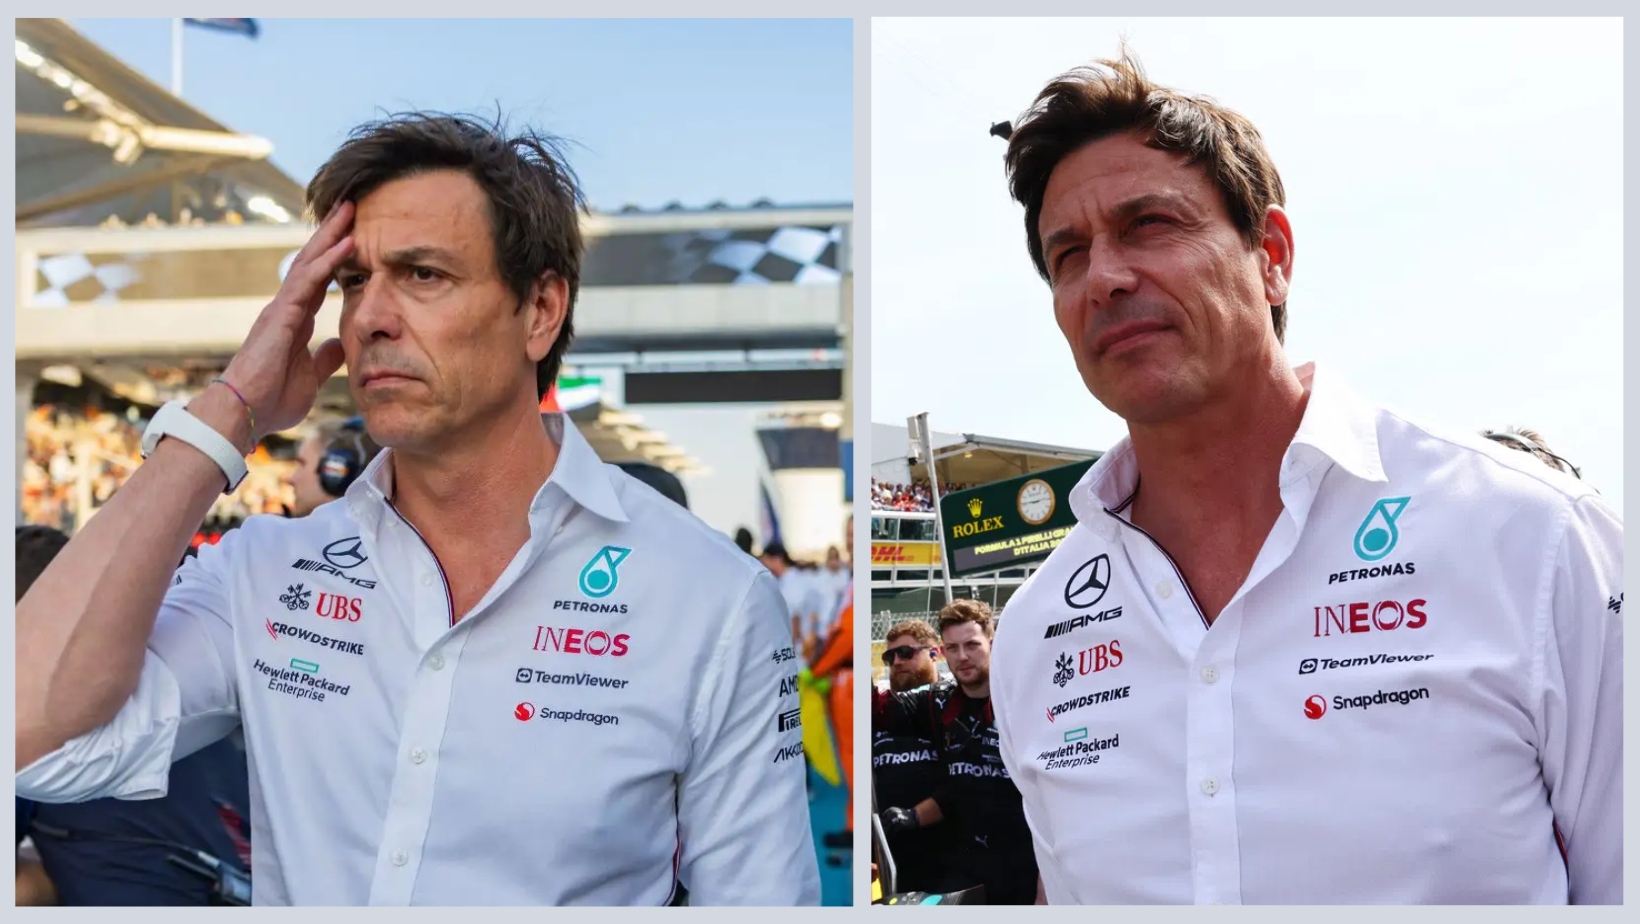 Toto Wolff Parents: Who Are They?